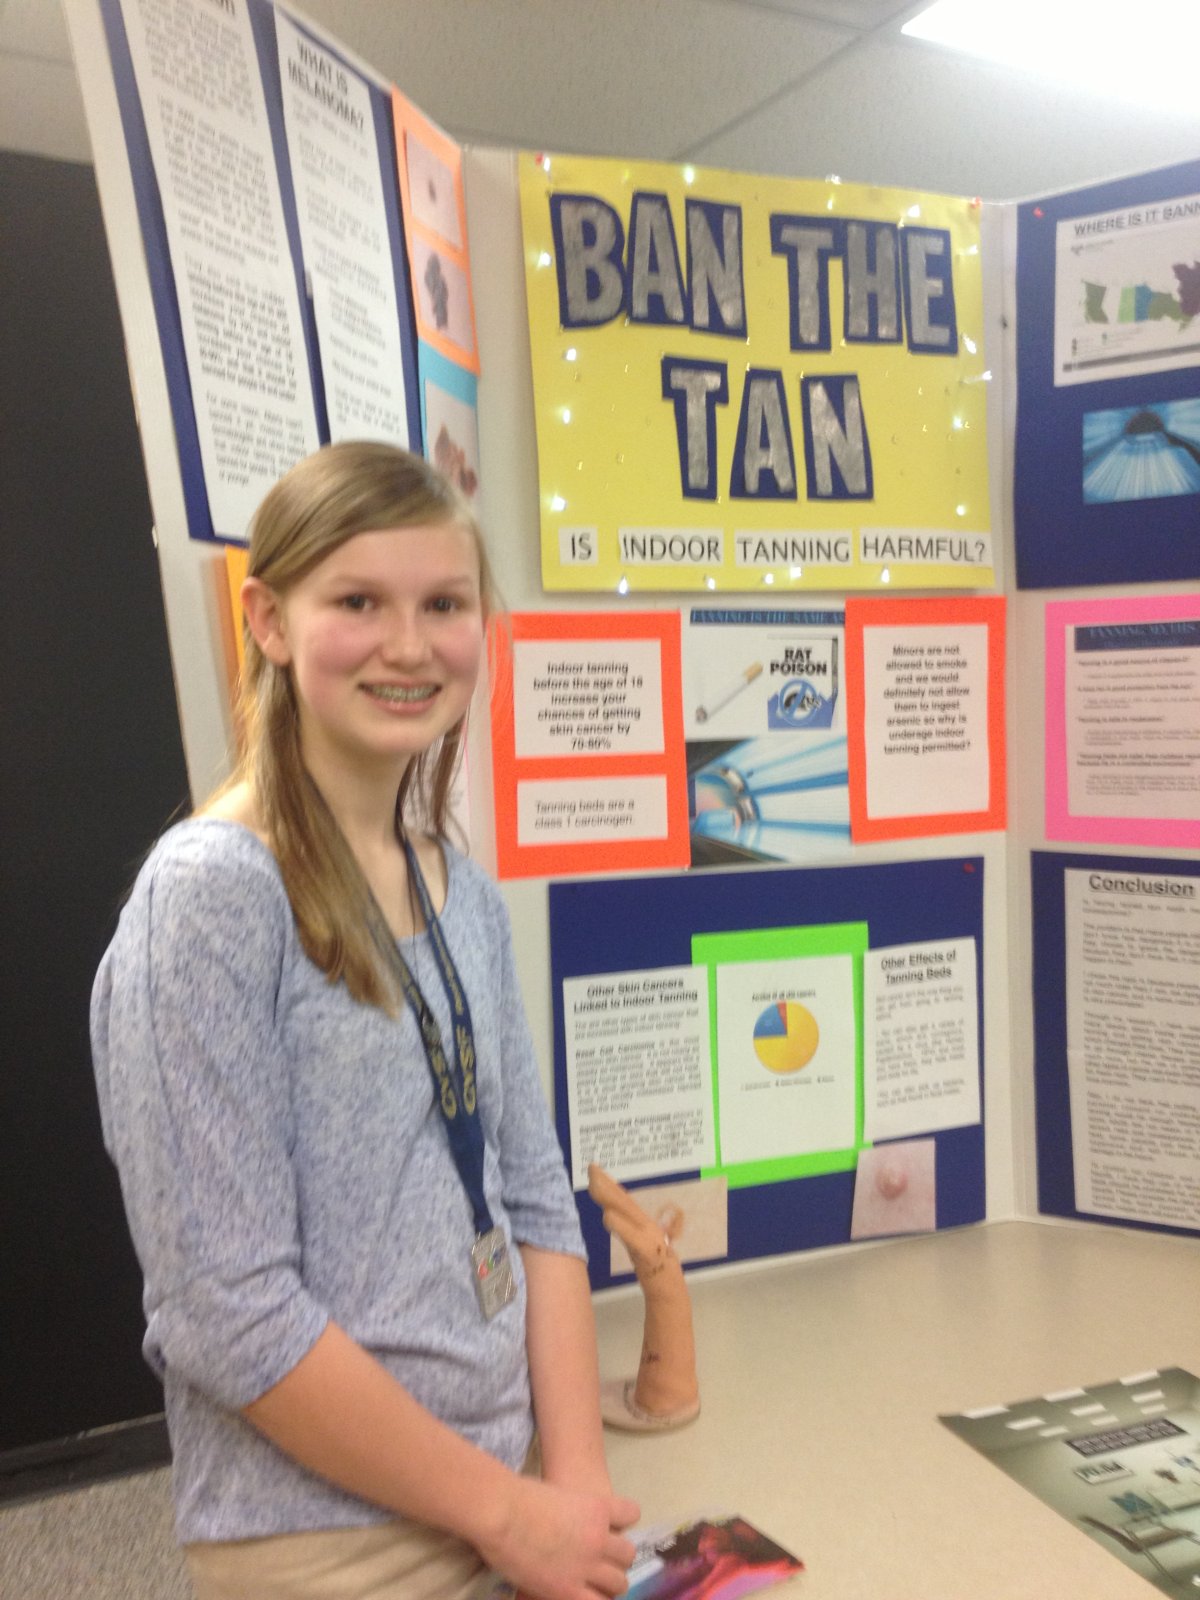 13-year-old Cassie Barrow brought home the silver medal at the Calgary Youth Science Fair, for her project on the effects of indoor tanning.